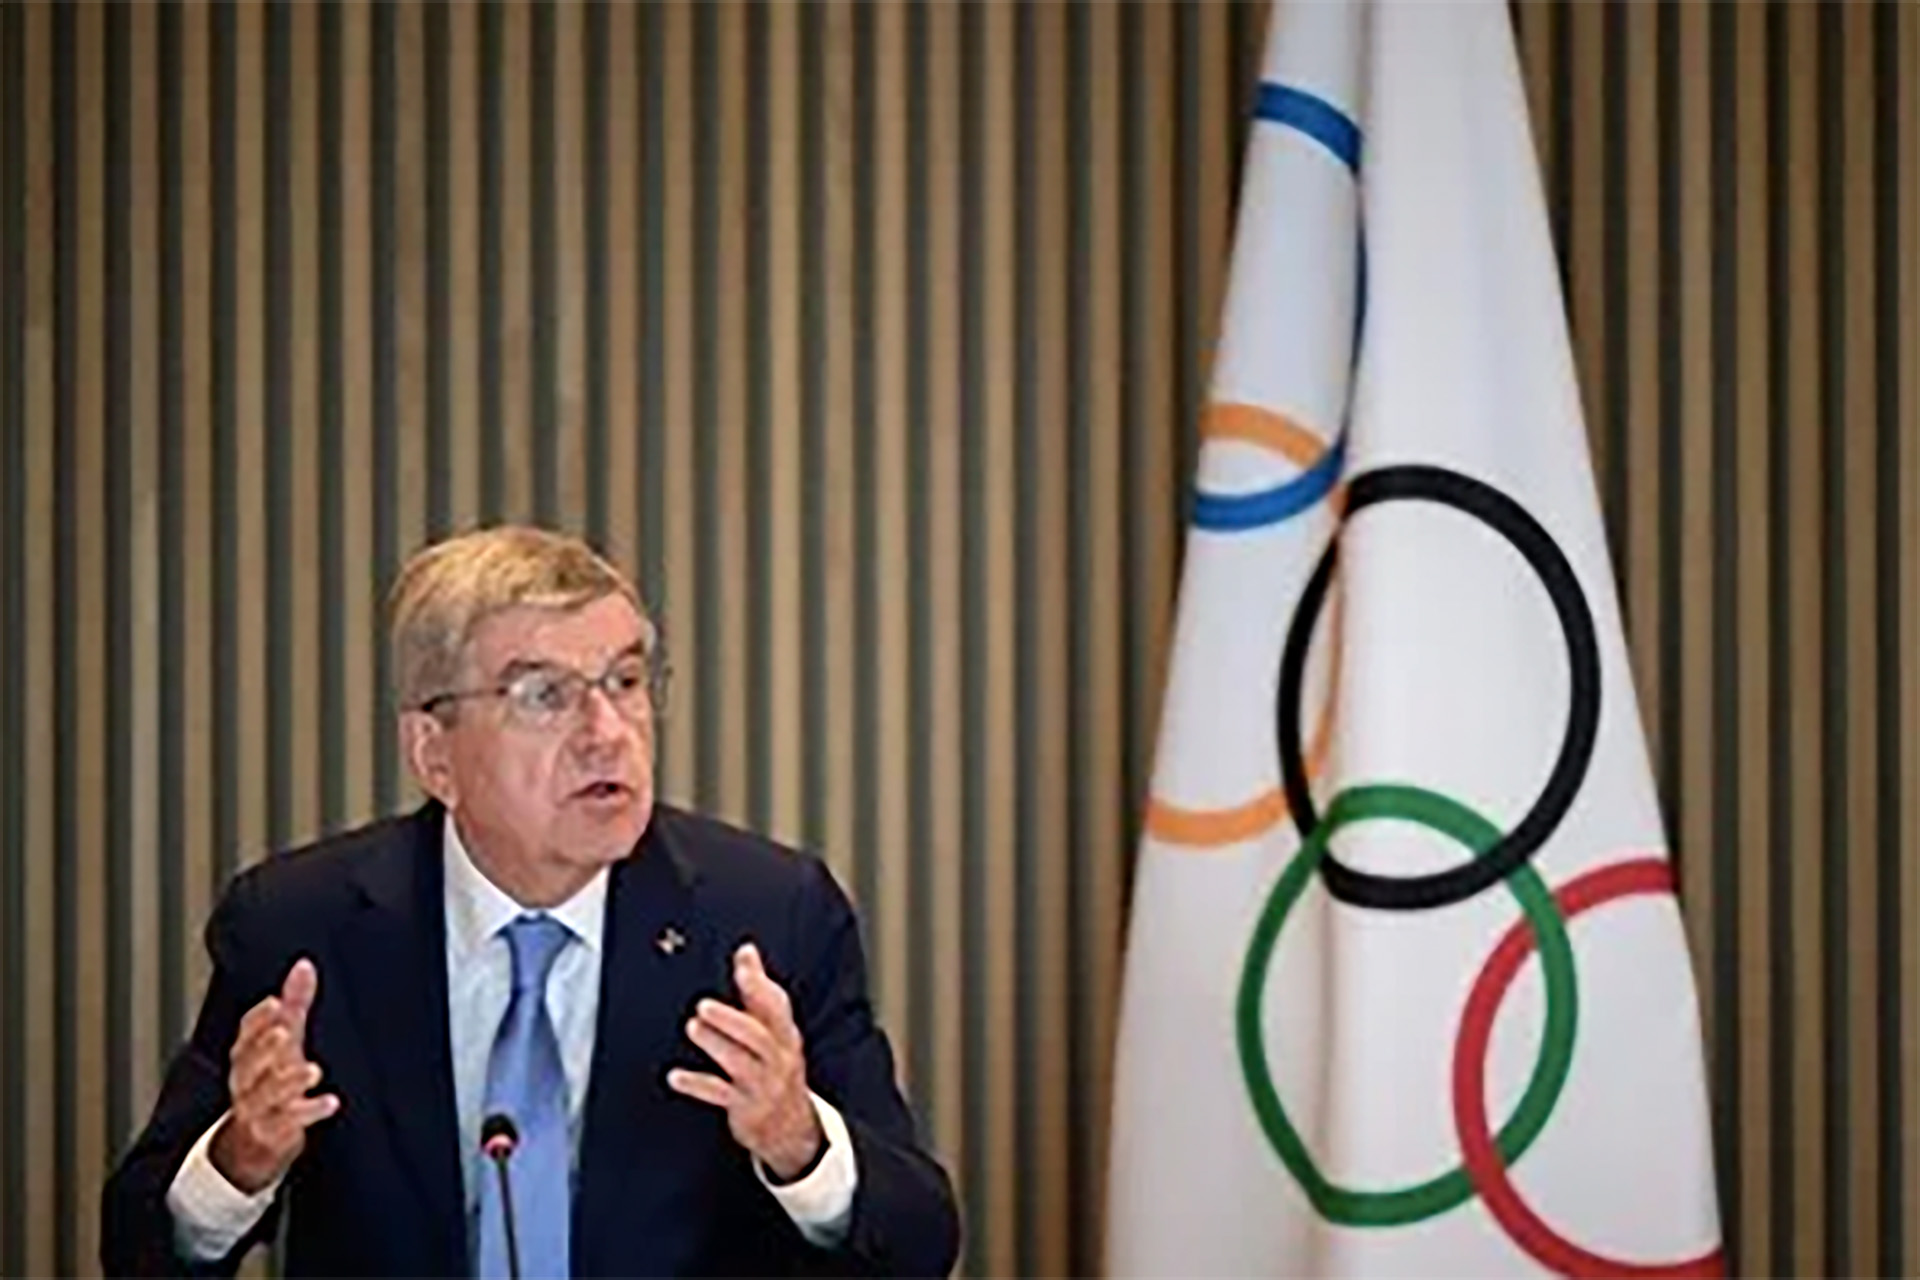 IOC President Thomas Bach attends the opening of the Executive Board meeting at the Olympic House in Lausanne, Switzerland.